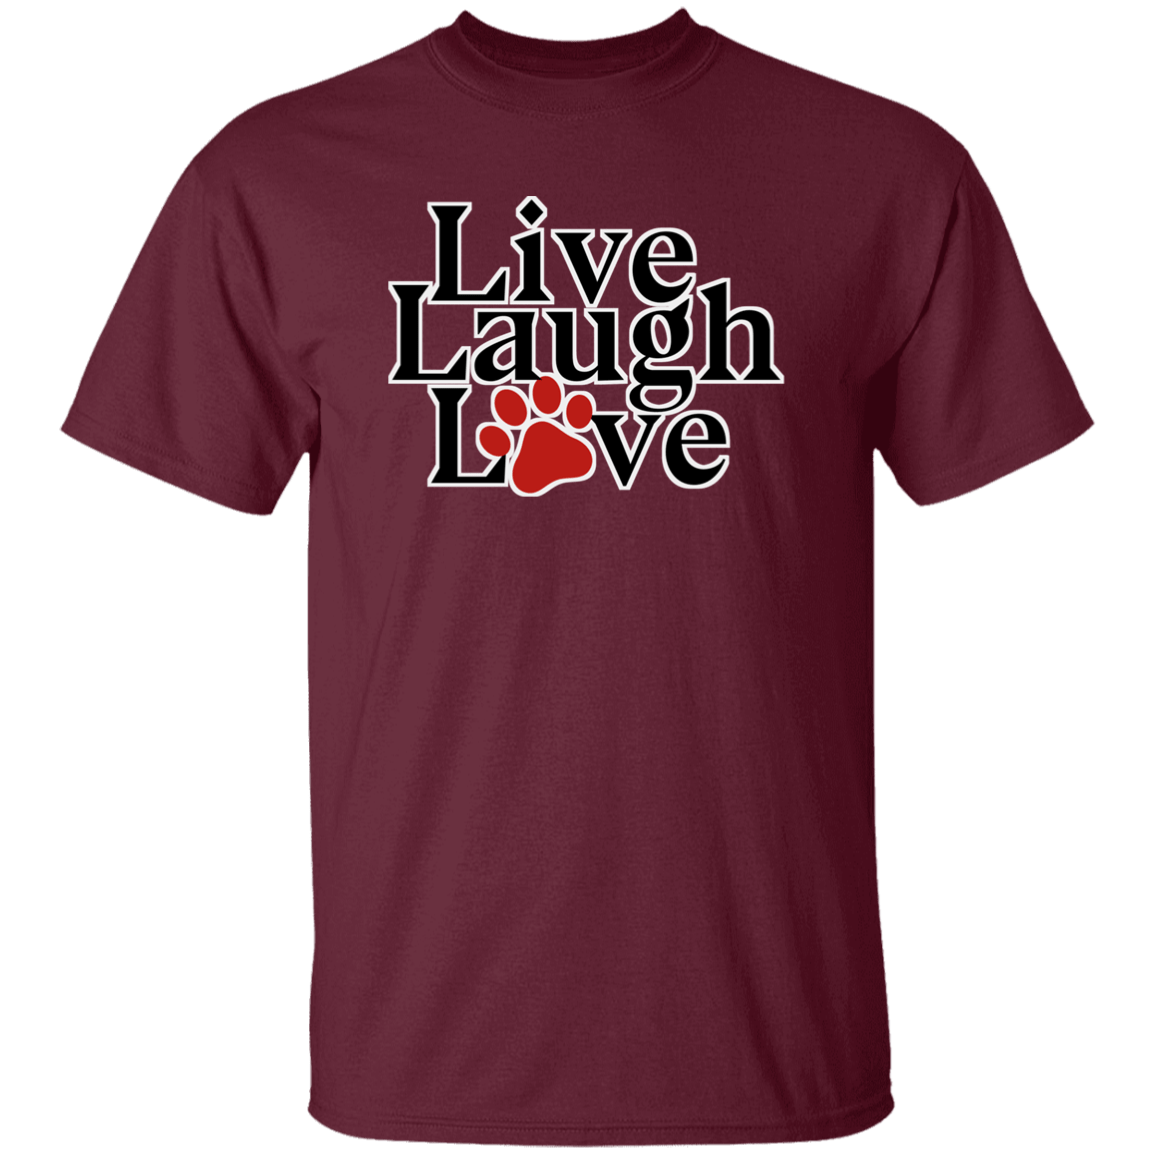 Live Laugh Love - Youth T-Shirt.